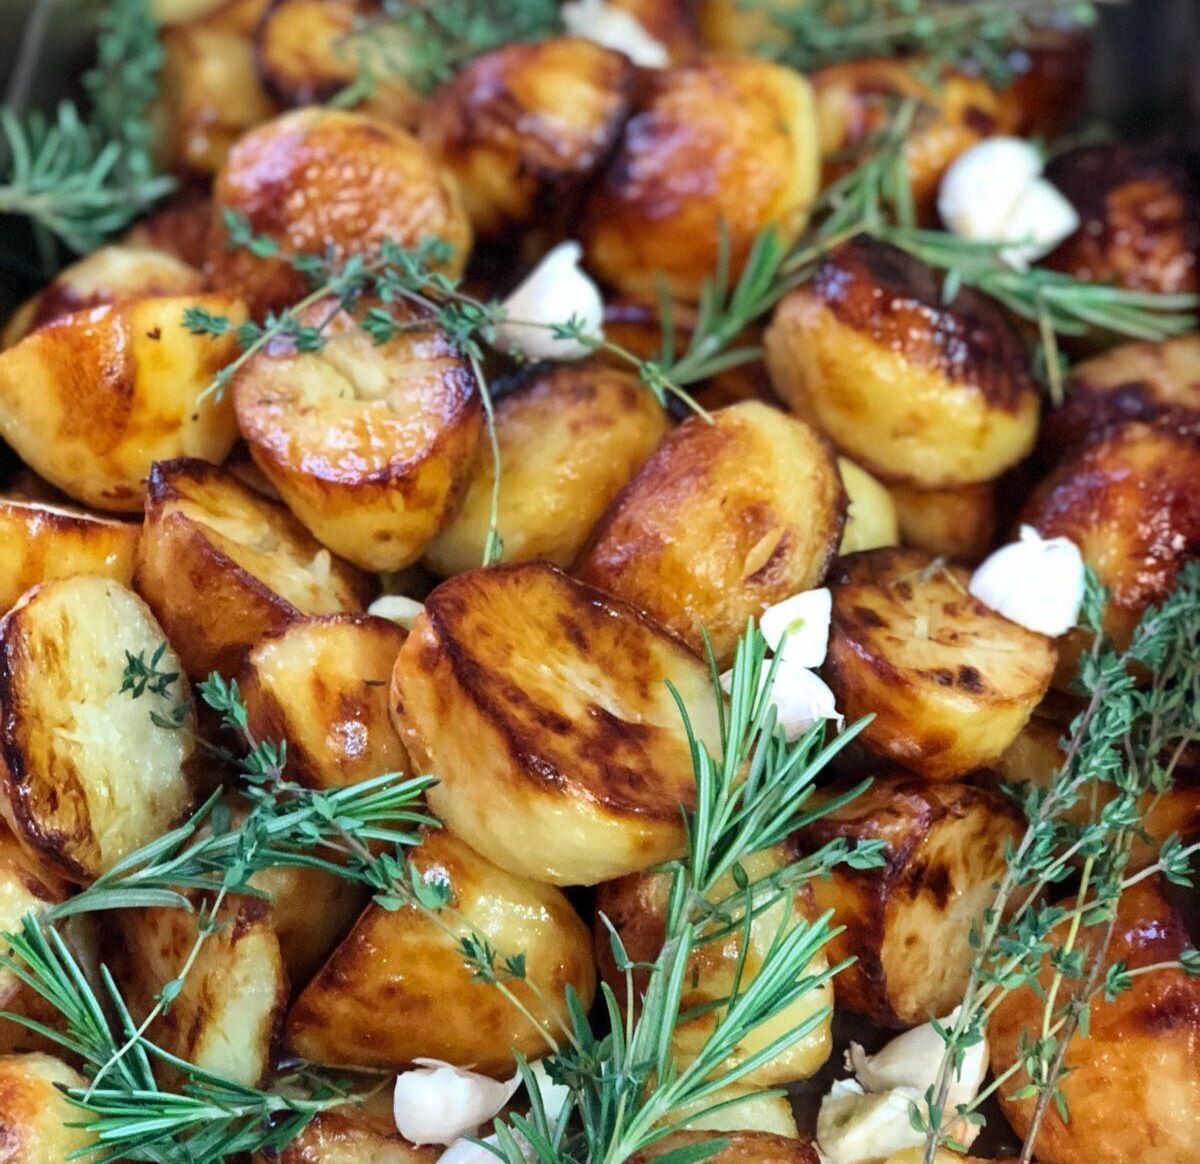 Roasts with the most – piles of roast potatoes